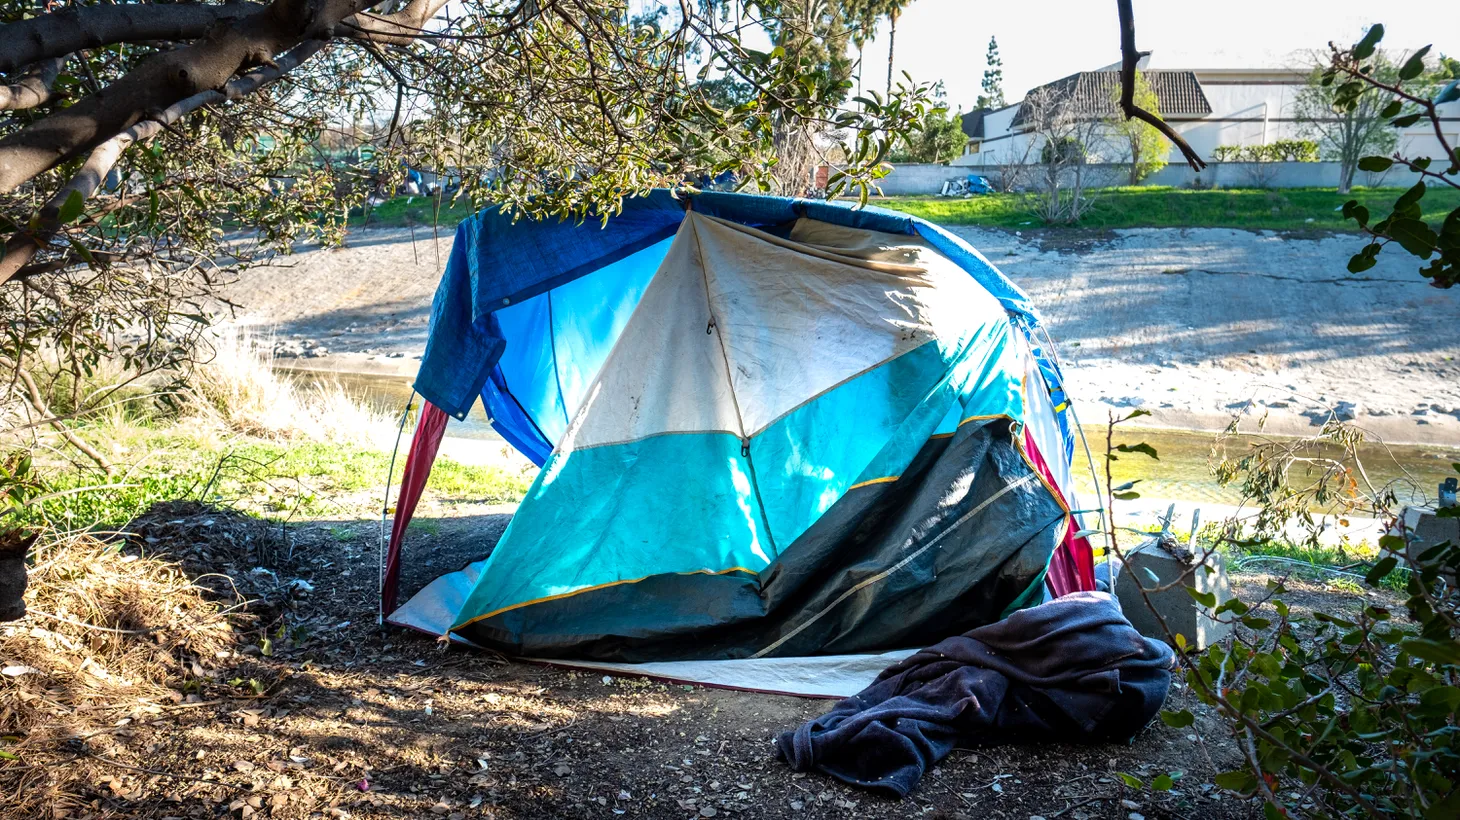 A small homeless camp is set up along the Ballona Creek river path in Culver City, California, Feb. 4, 2022.